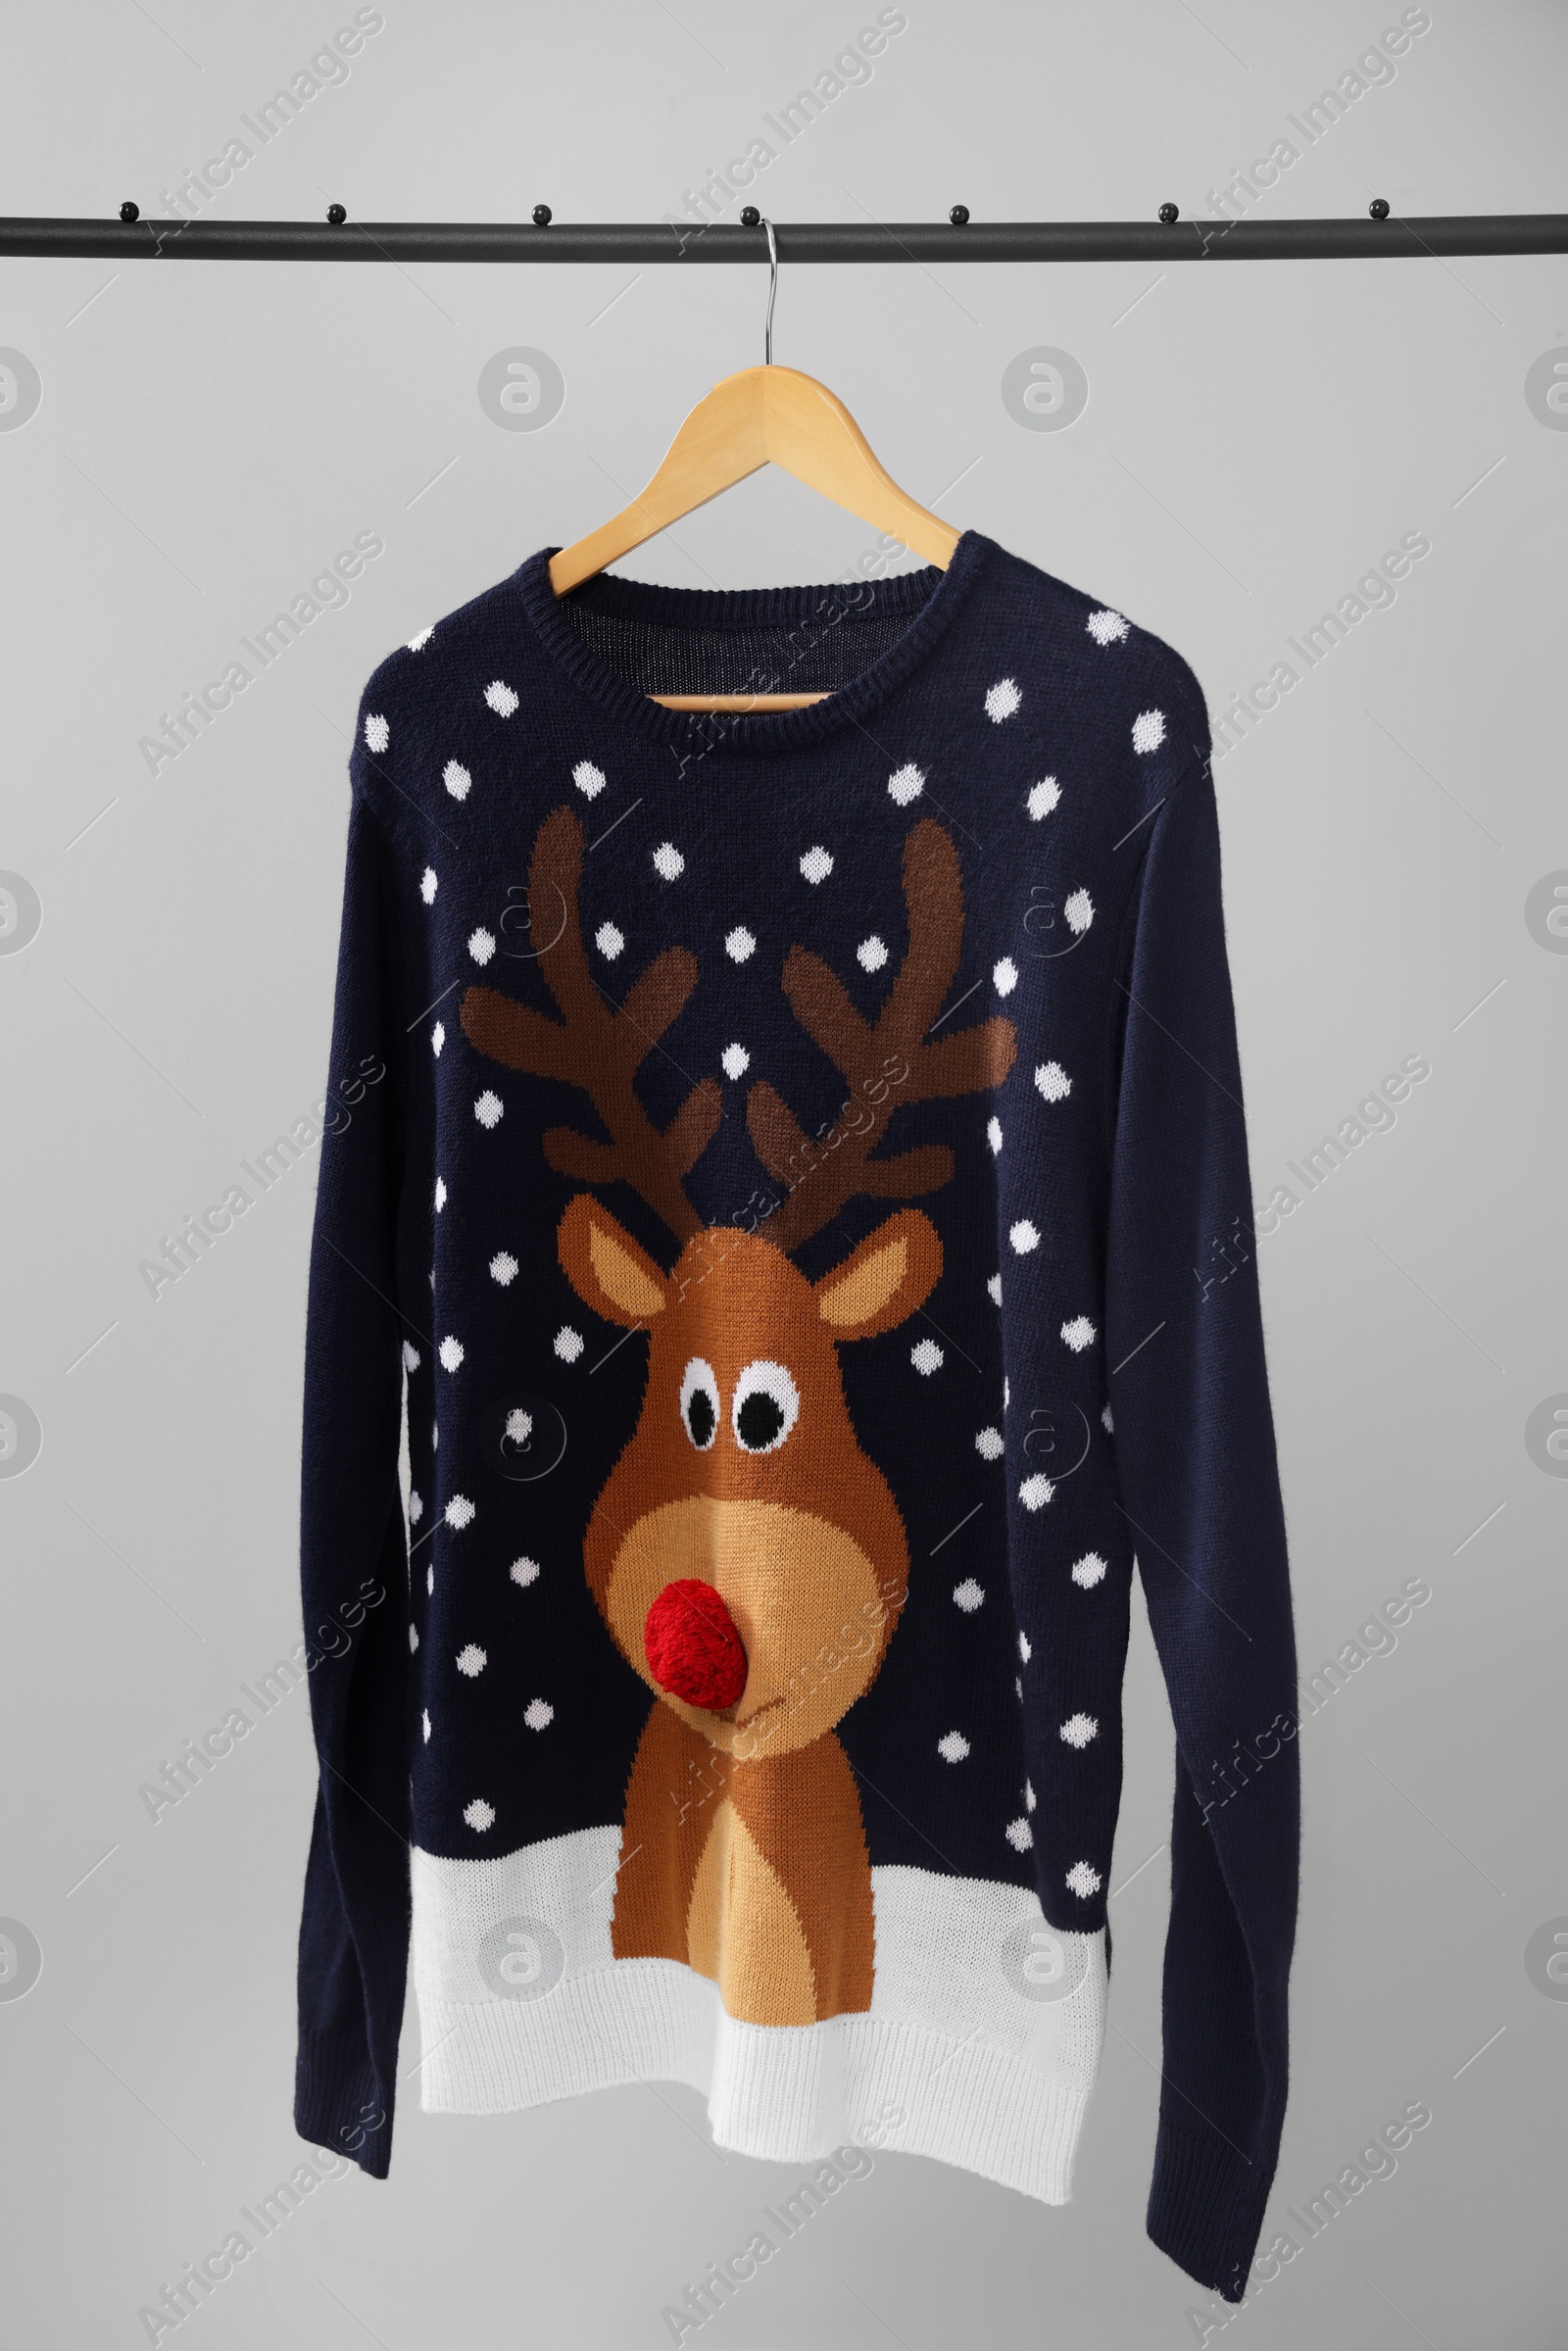 Photo of Rack with Christmas sweater on light background